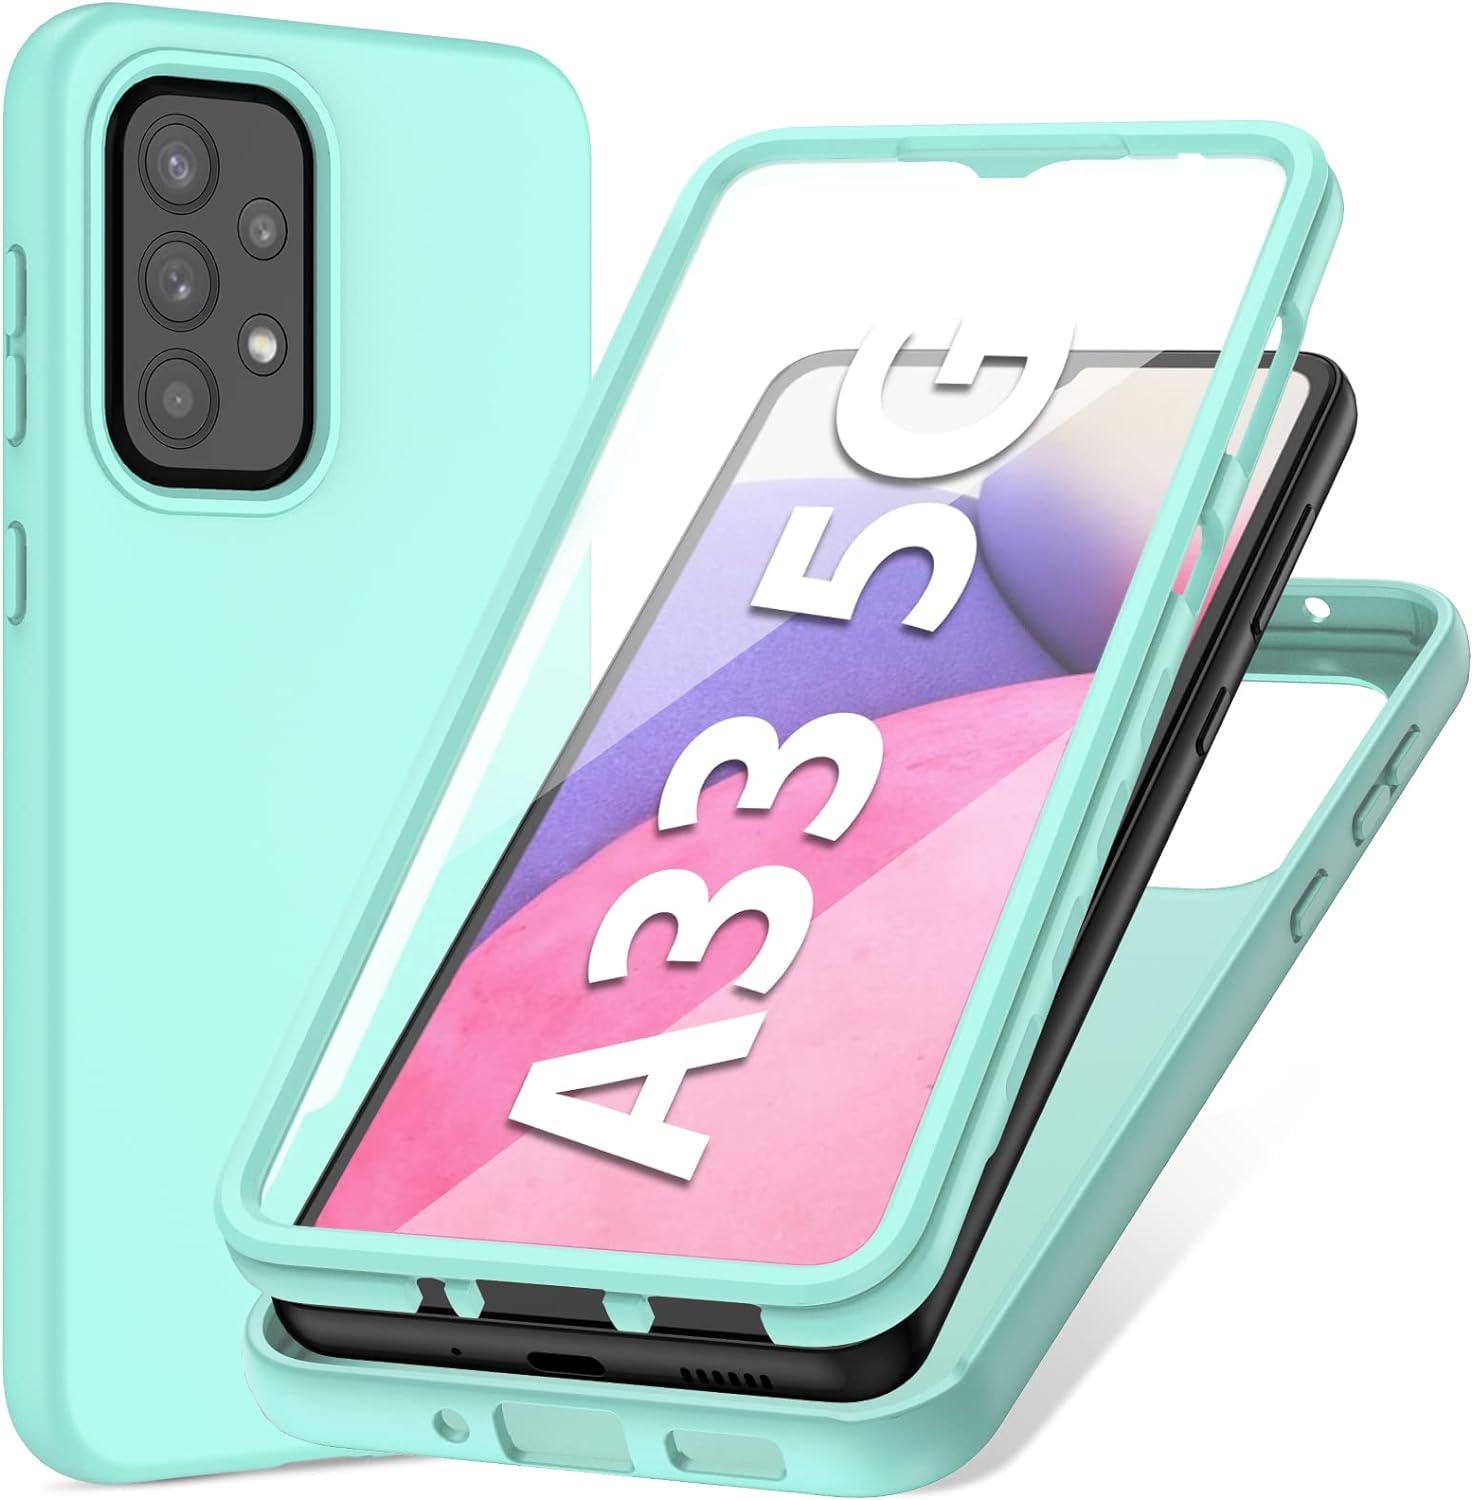 Galaxy A33 5G Case: TPU Silicone Drop Protection Slim Rugged Case